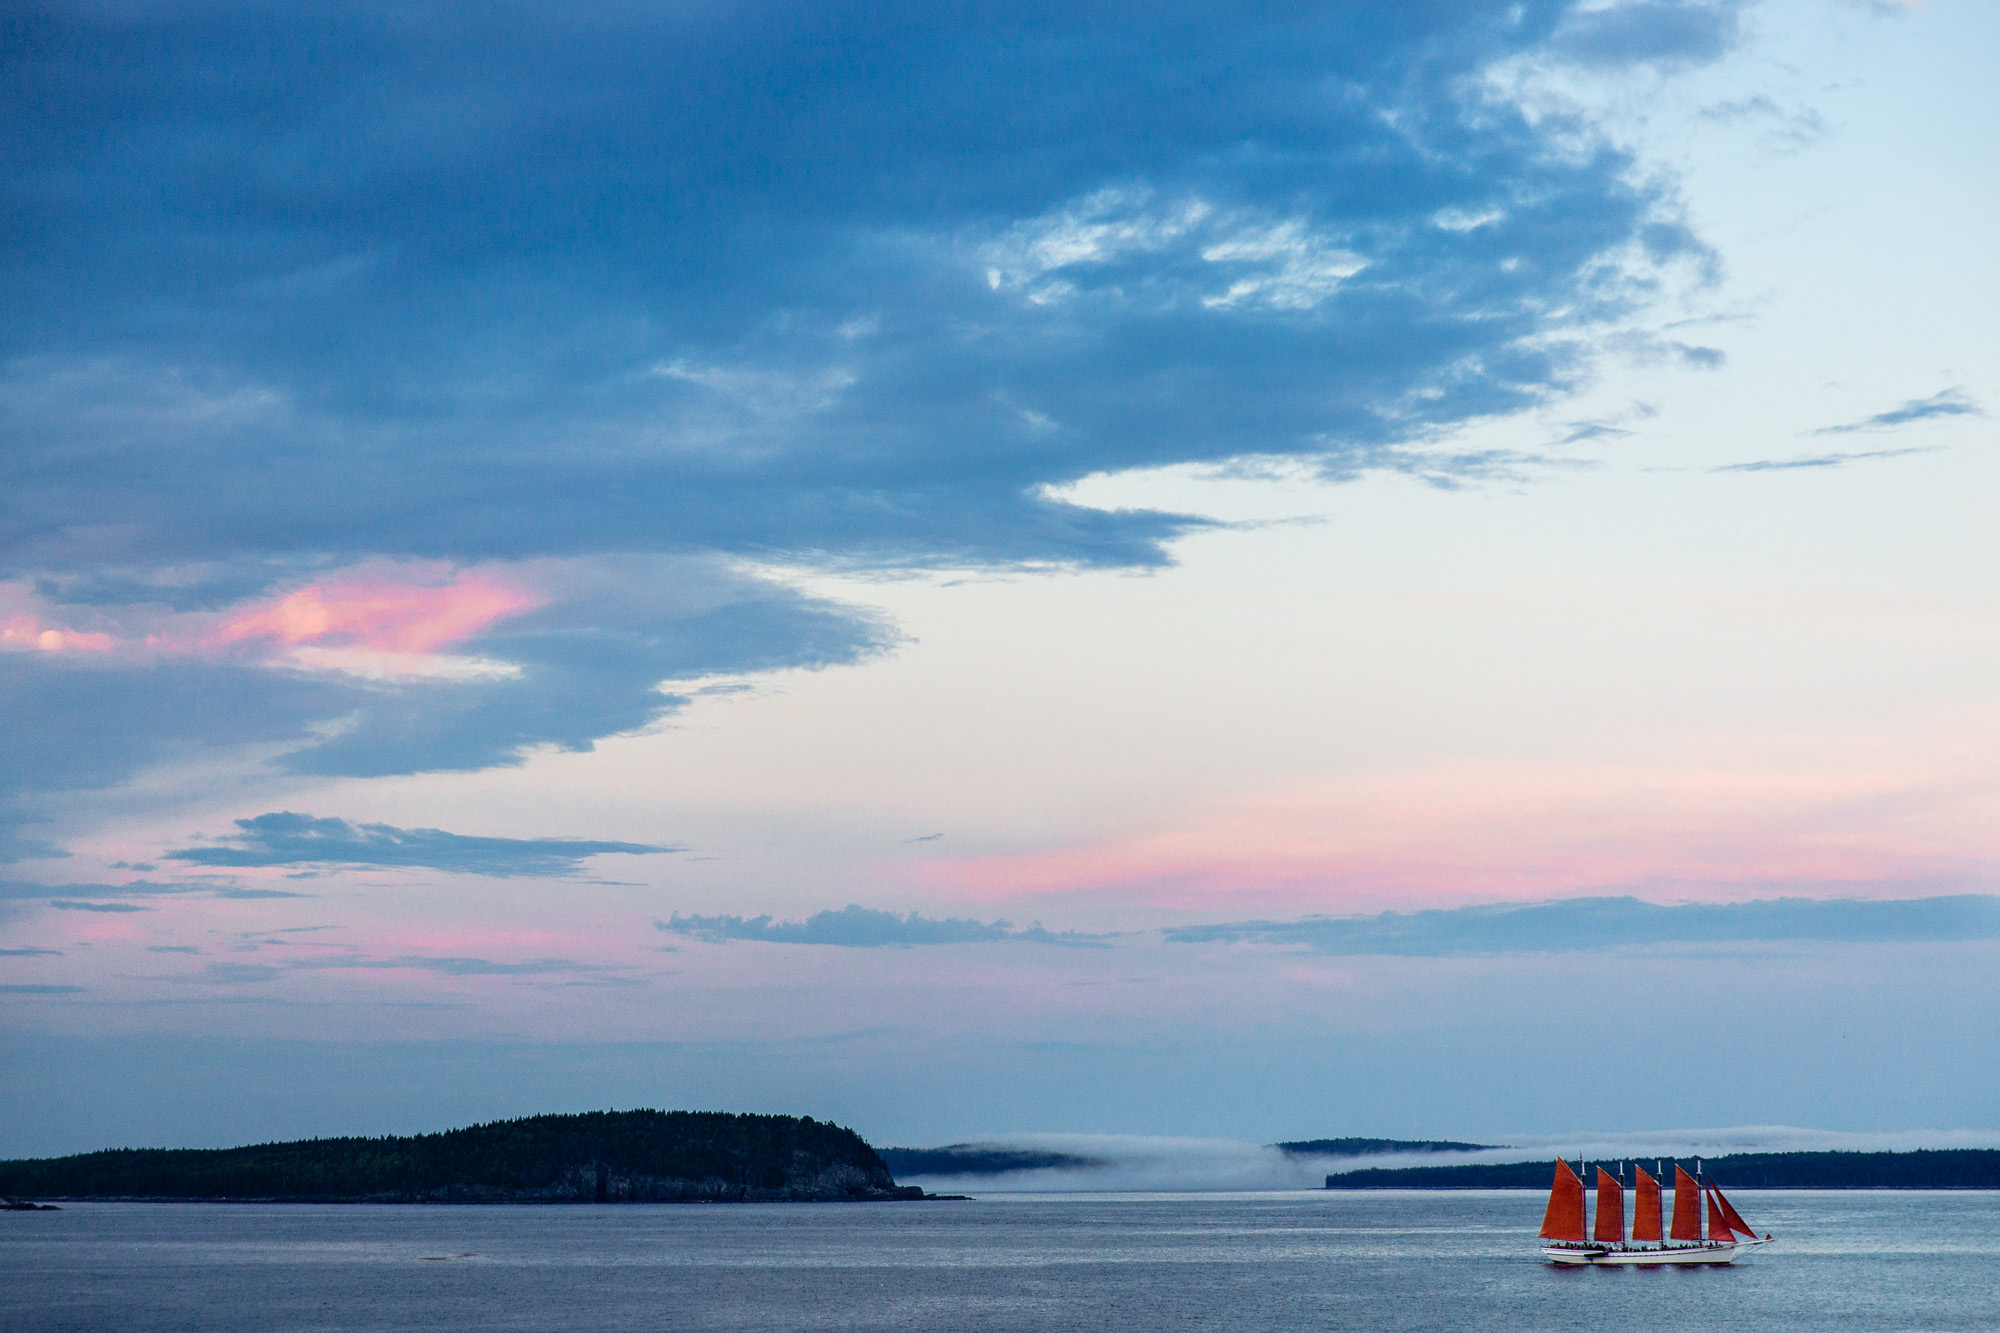 A striking summer sunset in Bar Harbor with the Margaret Todd in the distance.